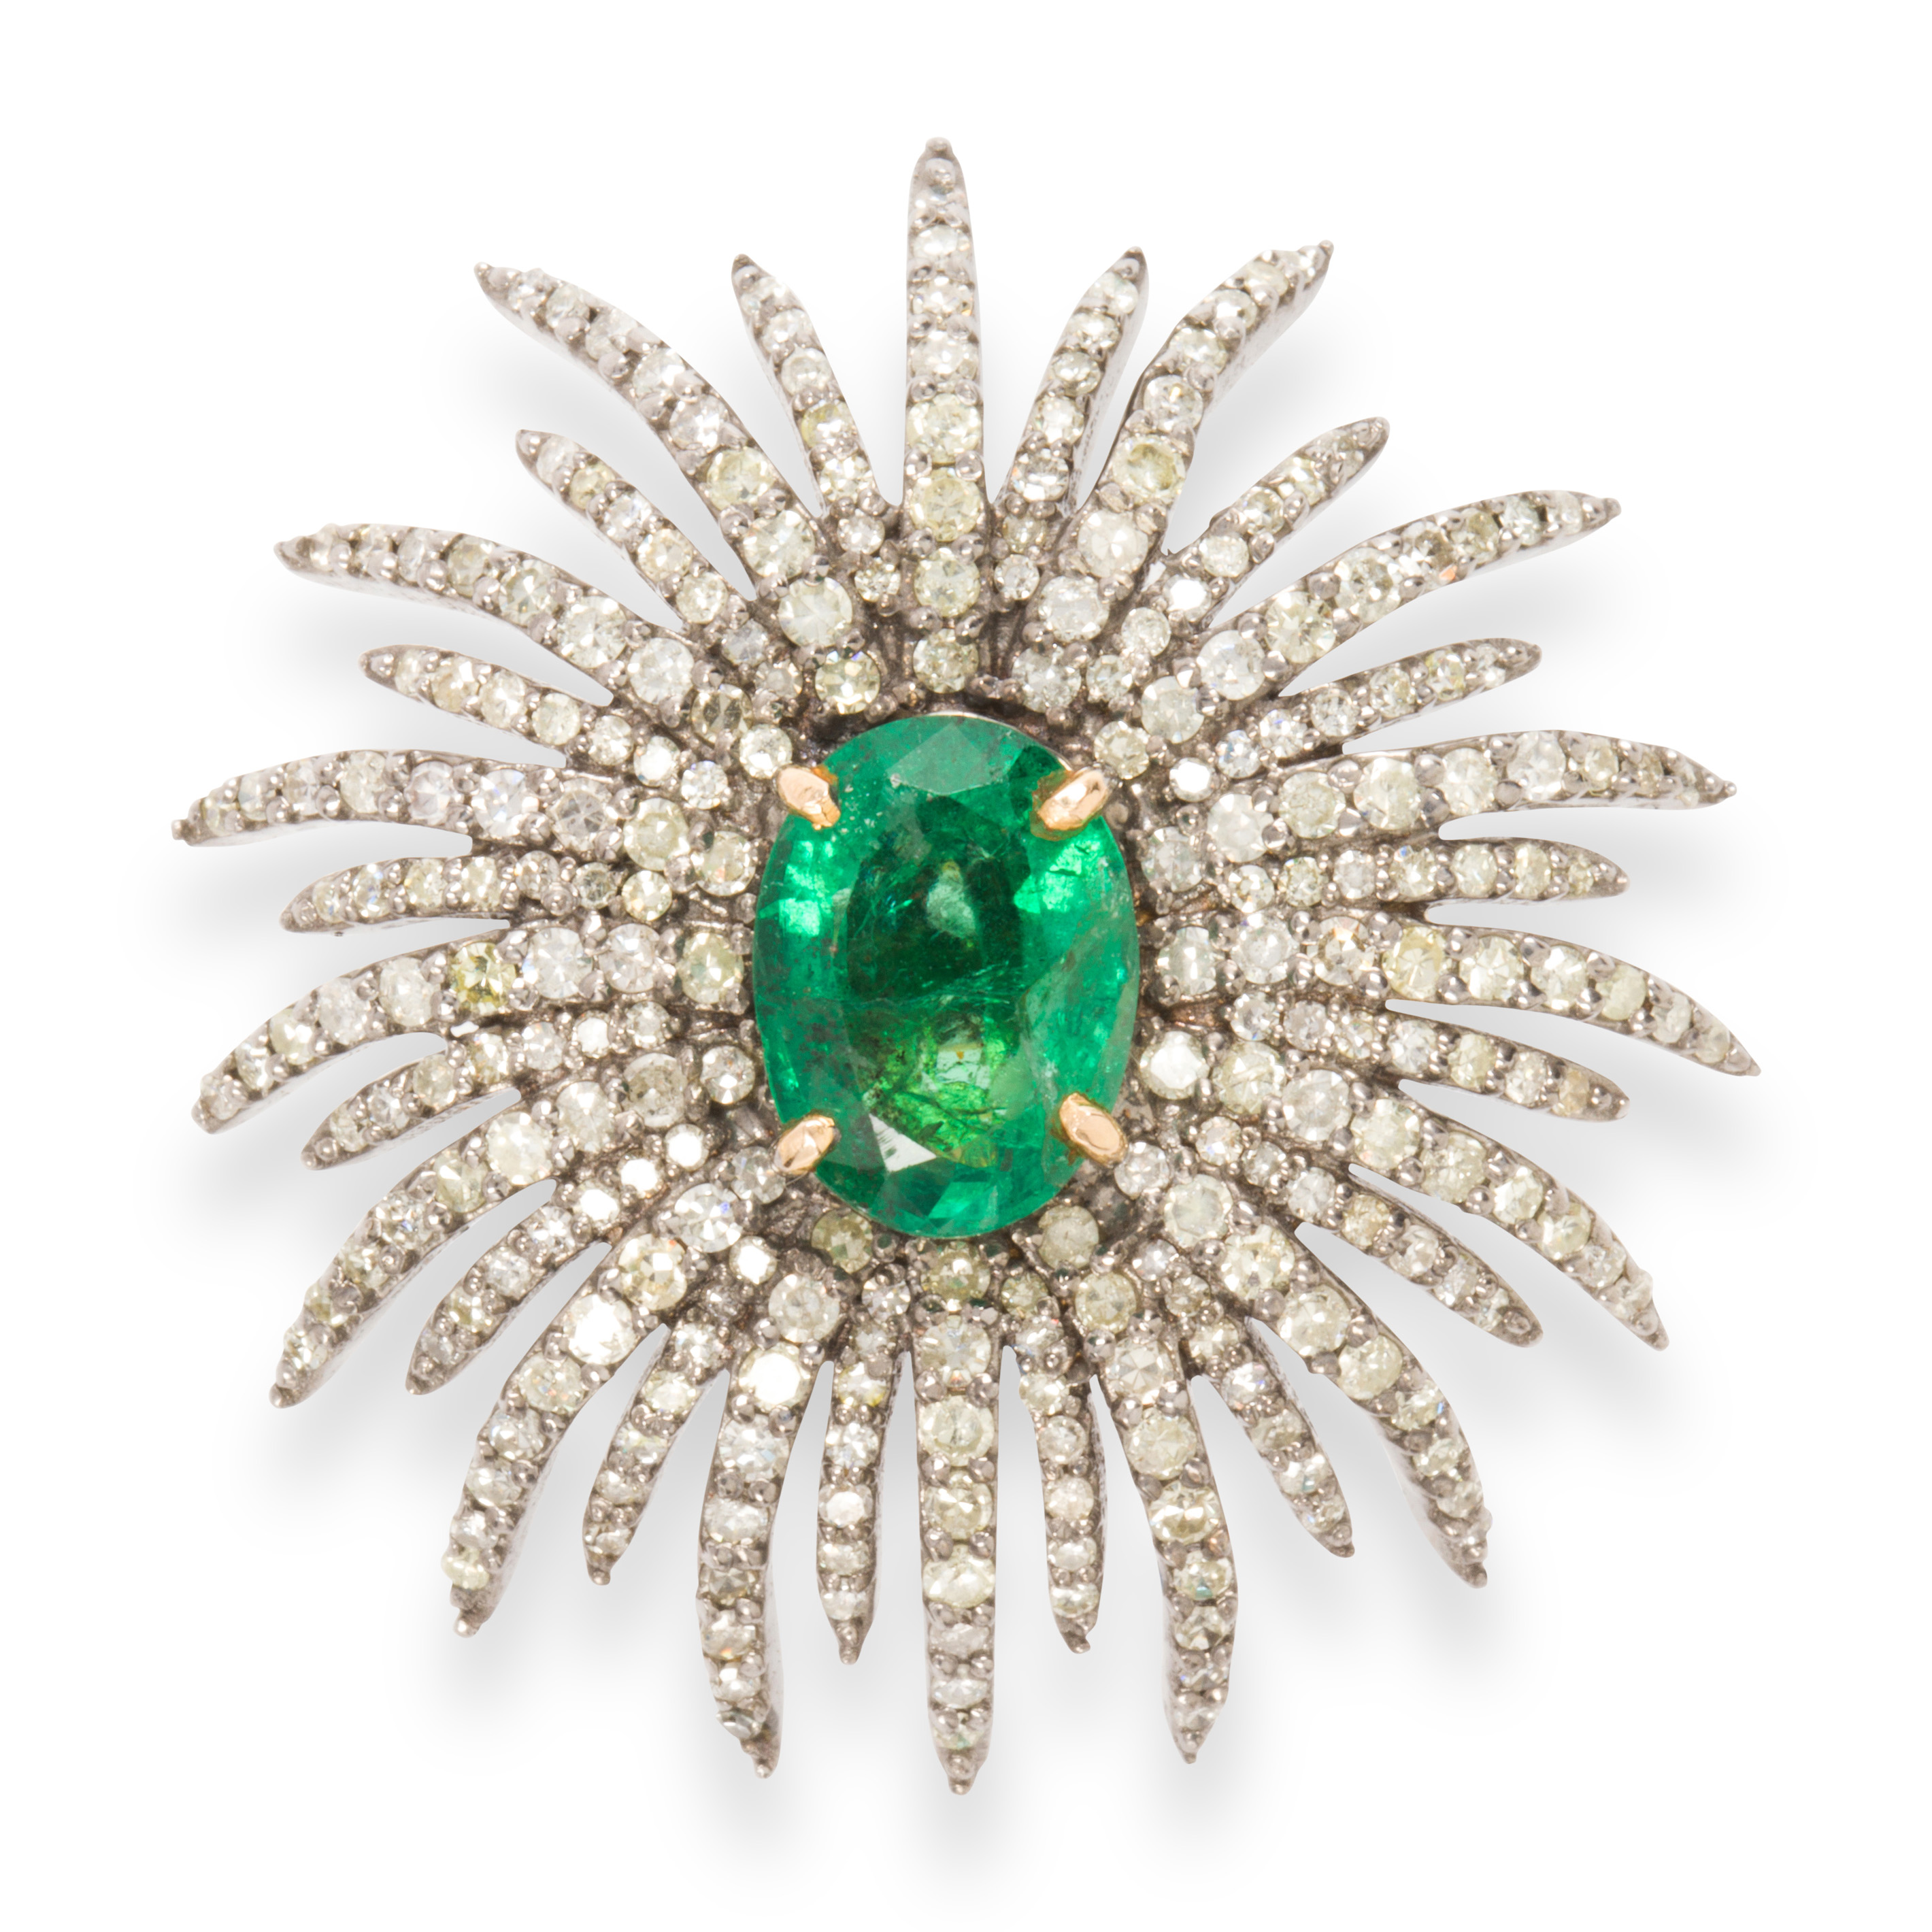 AN EMERALD AND DIAMOND RING An